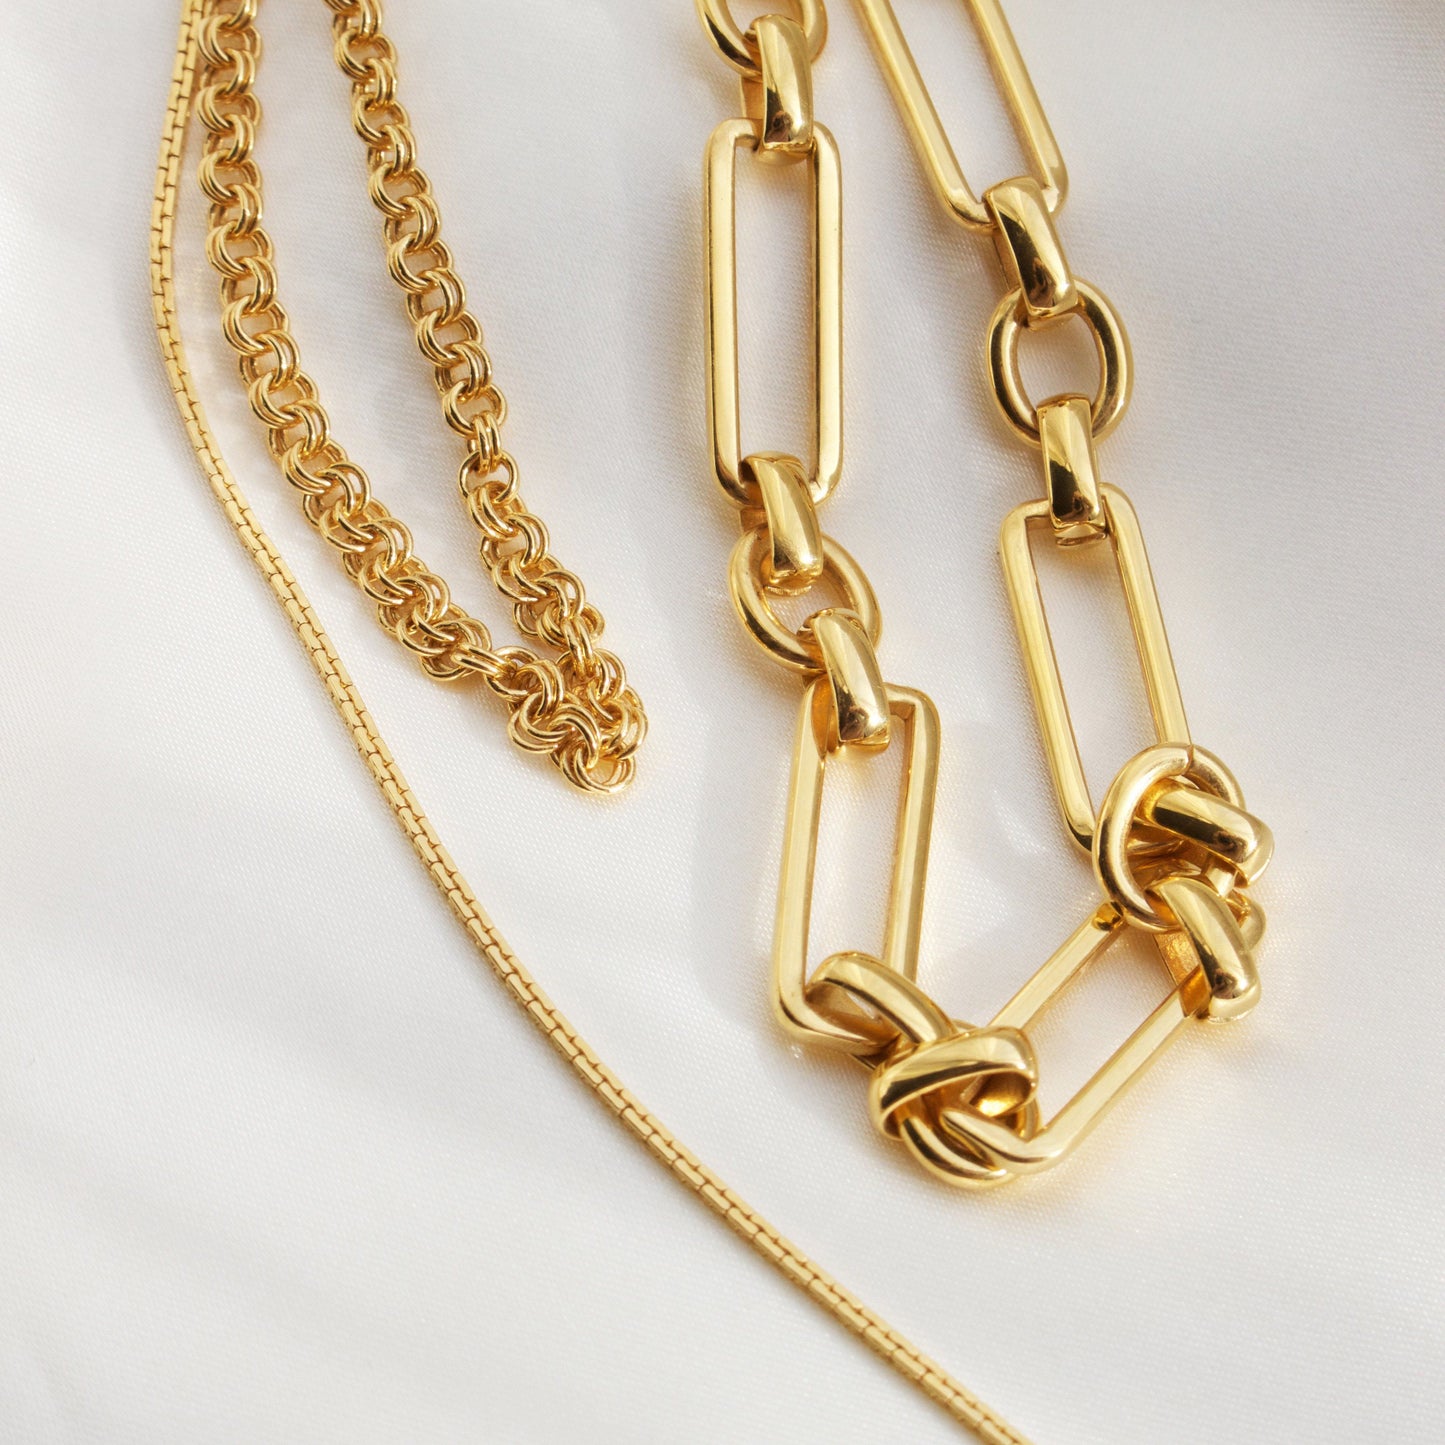 Chunky Link Chain in Gold Plated Brass Necklace VJI 